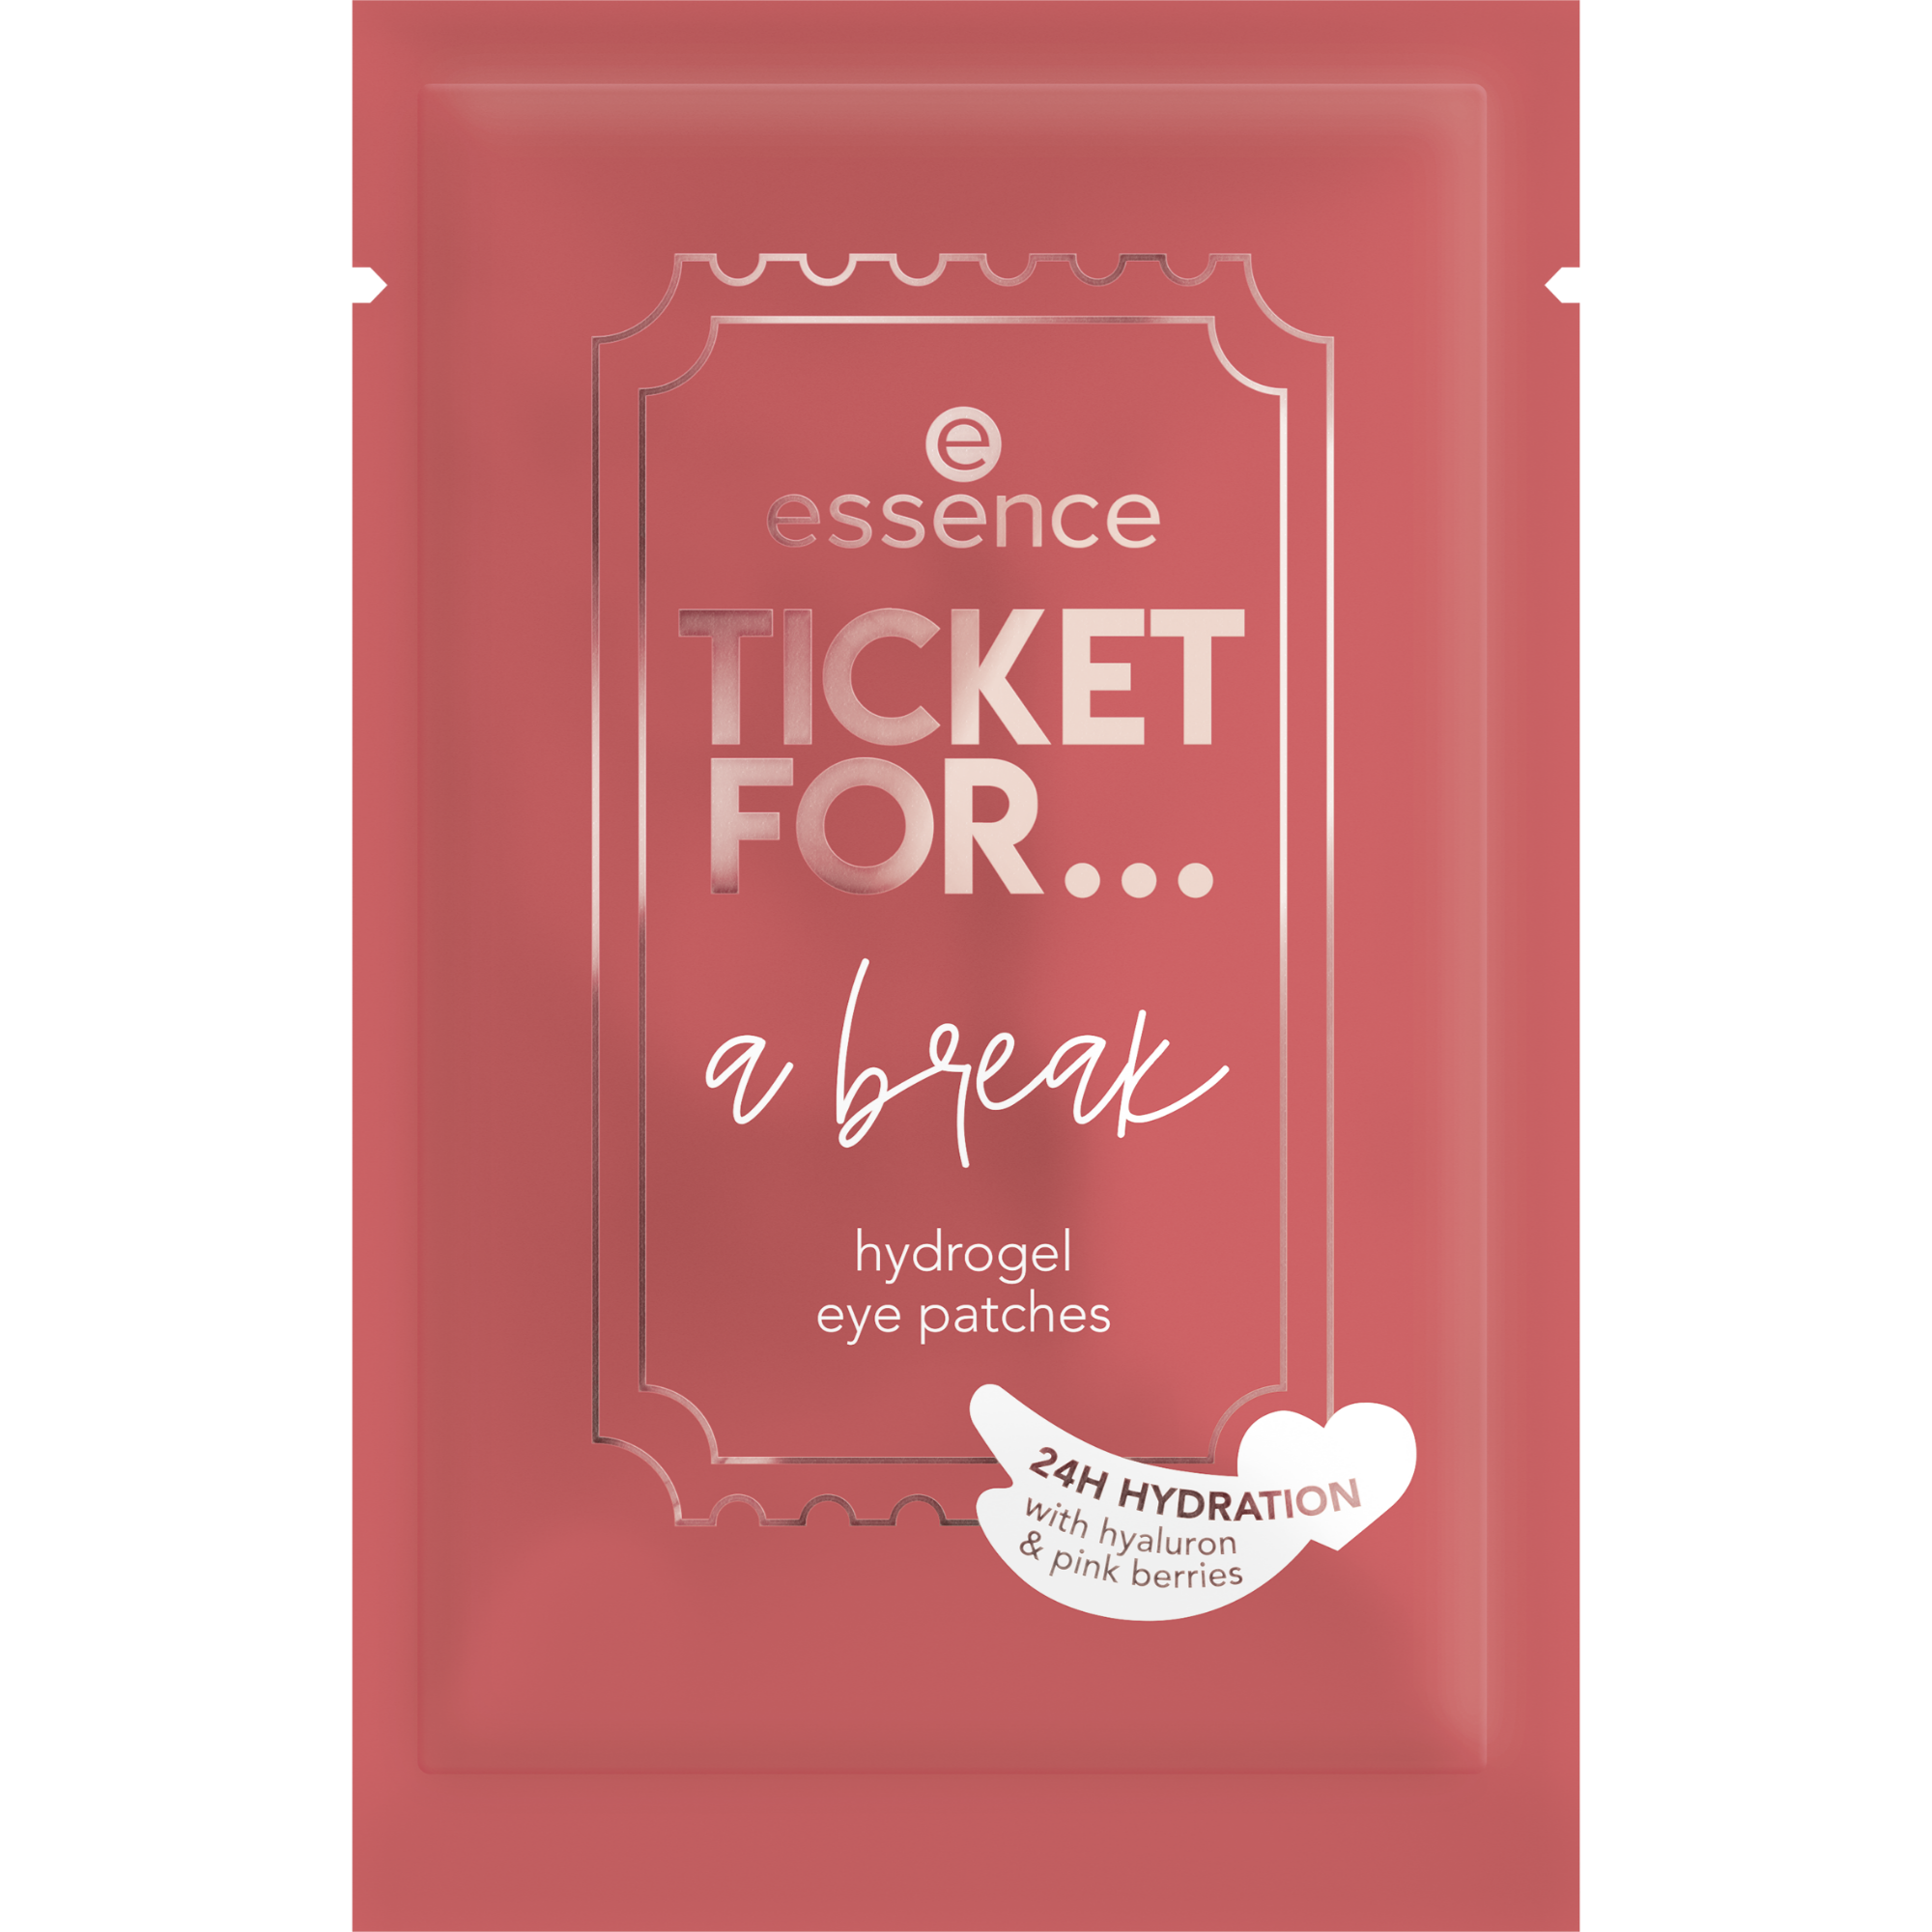 TICKET FOR... a break hydrogel eye patches